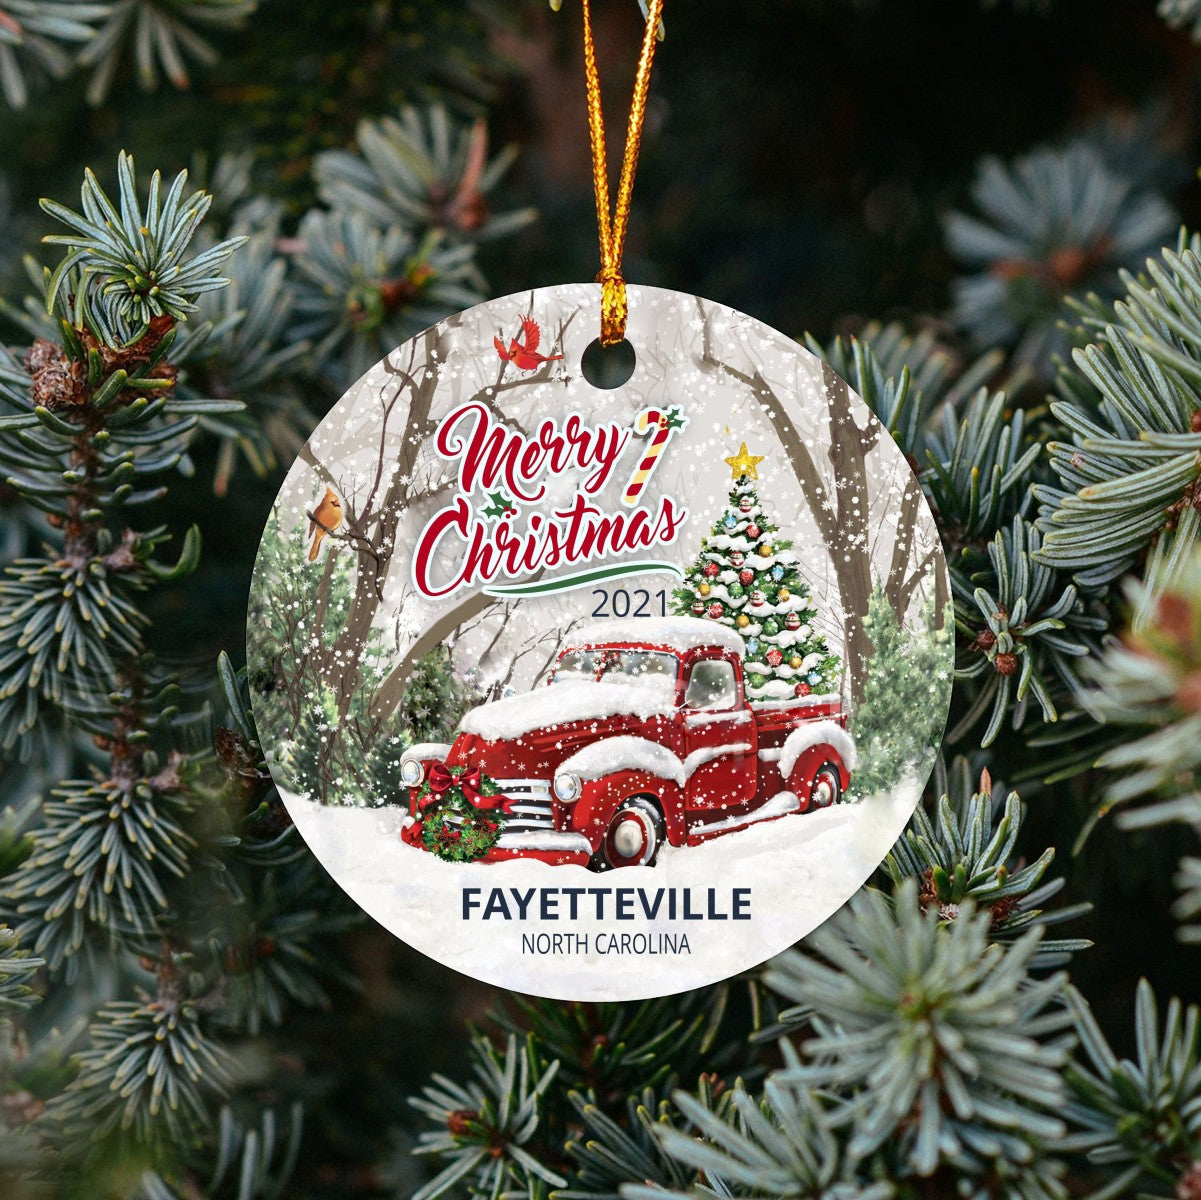 Christmas Tree Ornaments Fayetteville - Ornament Customize With Name City And State Fayetteville North Carolina NC - Red Truck Xmas Ornaments 3'' Plastic Gift For Family, Friend And Housewarming